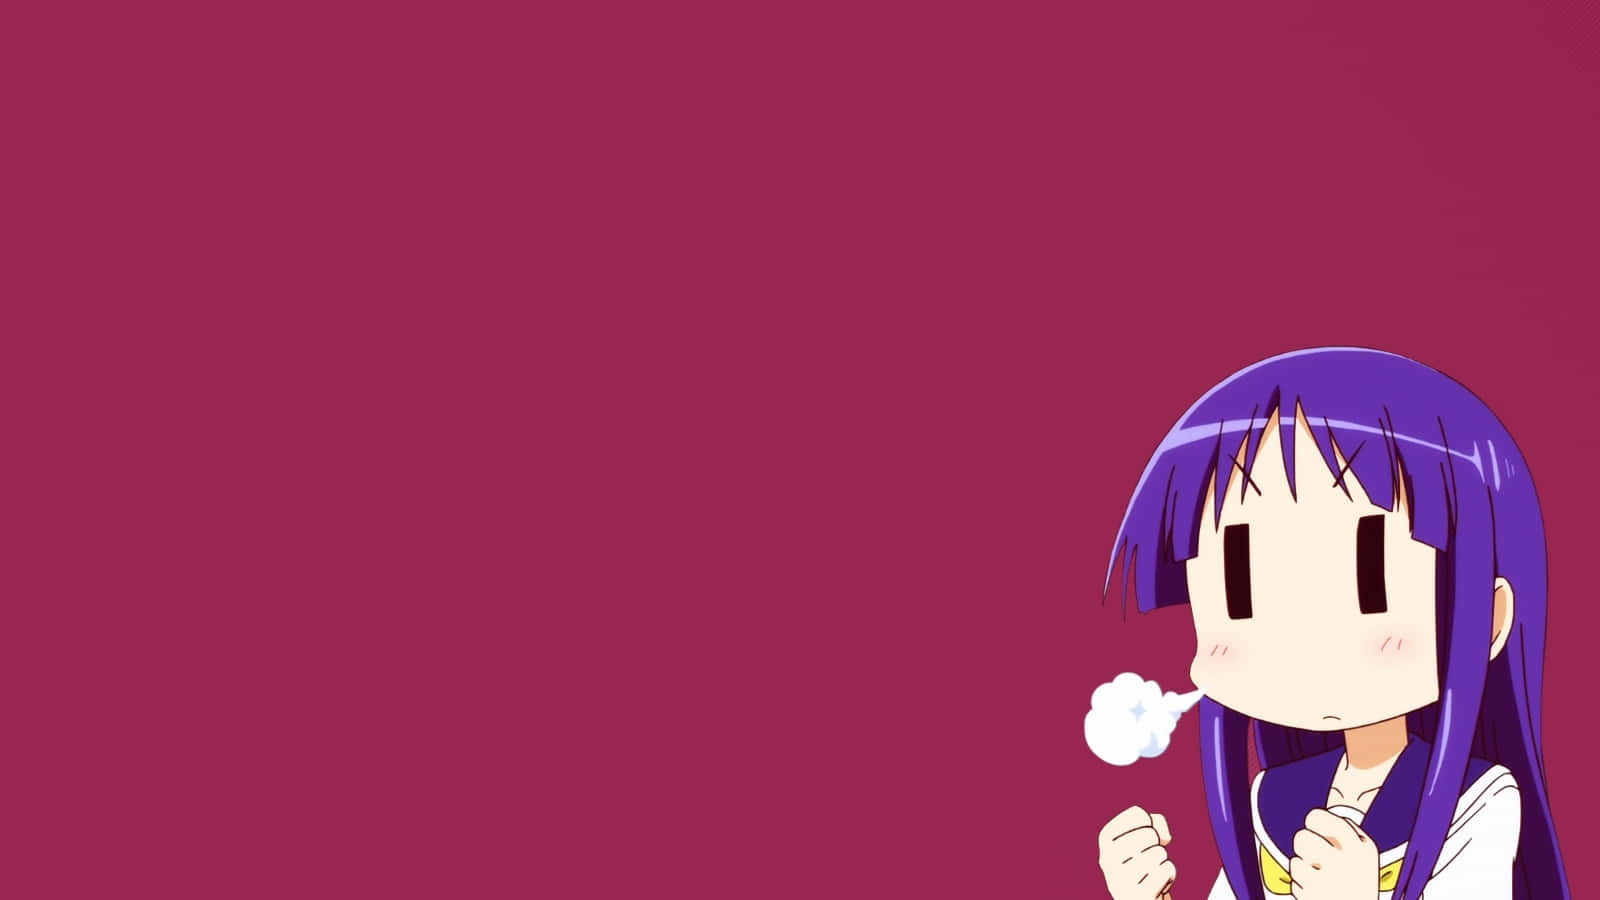 Anime Girl_ Blowing Bubbles_ Minimalist Background Wallpaper